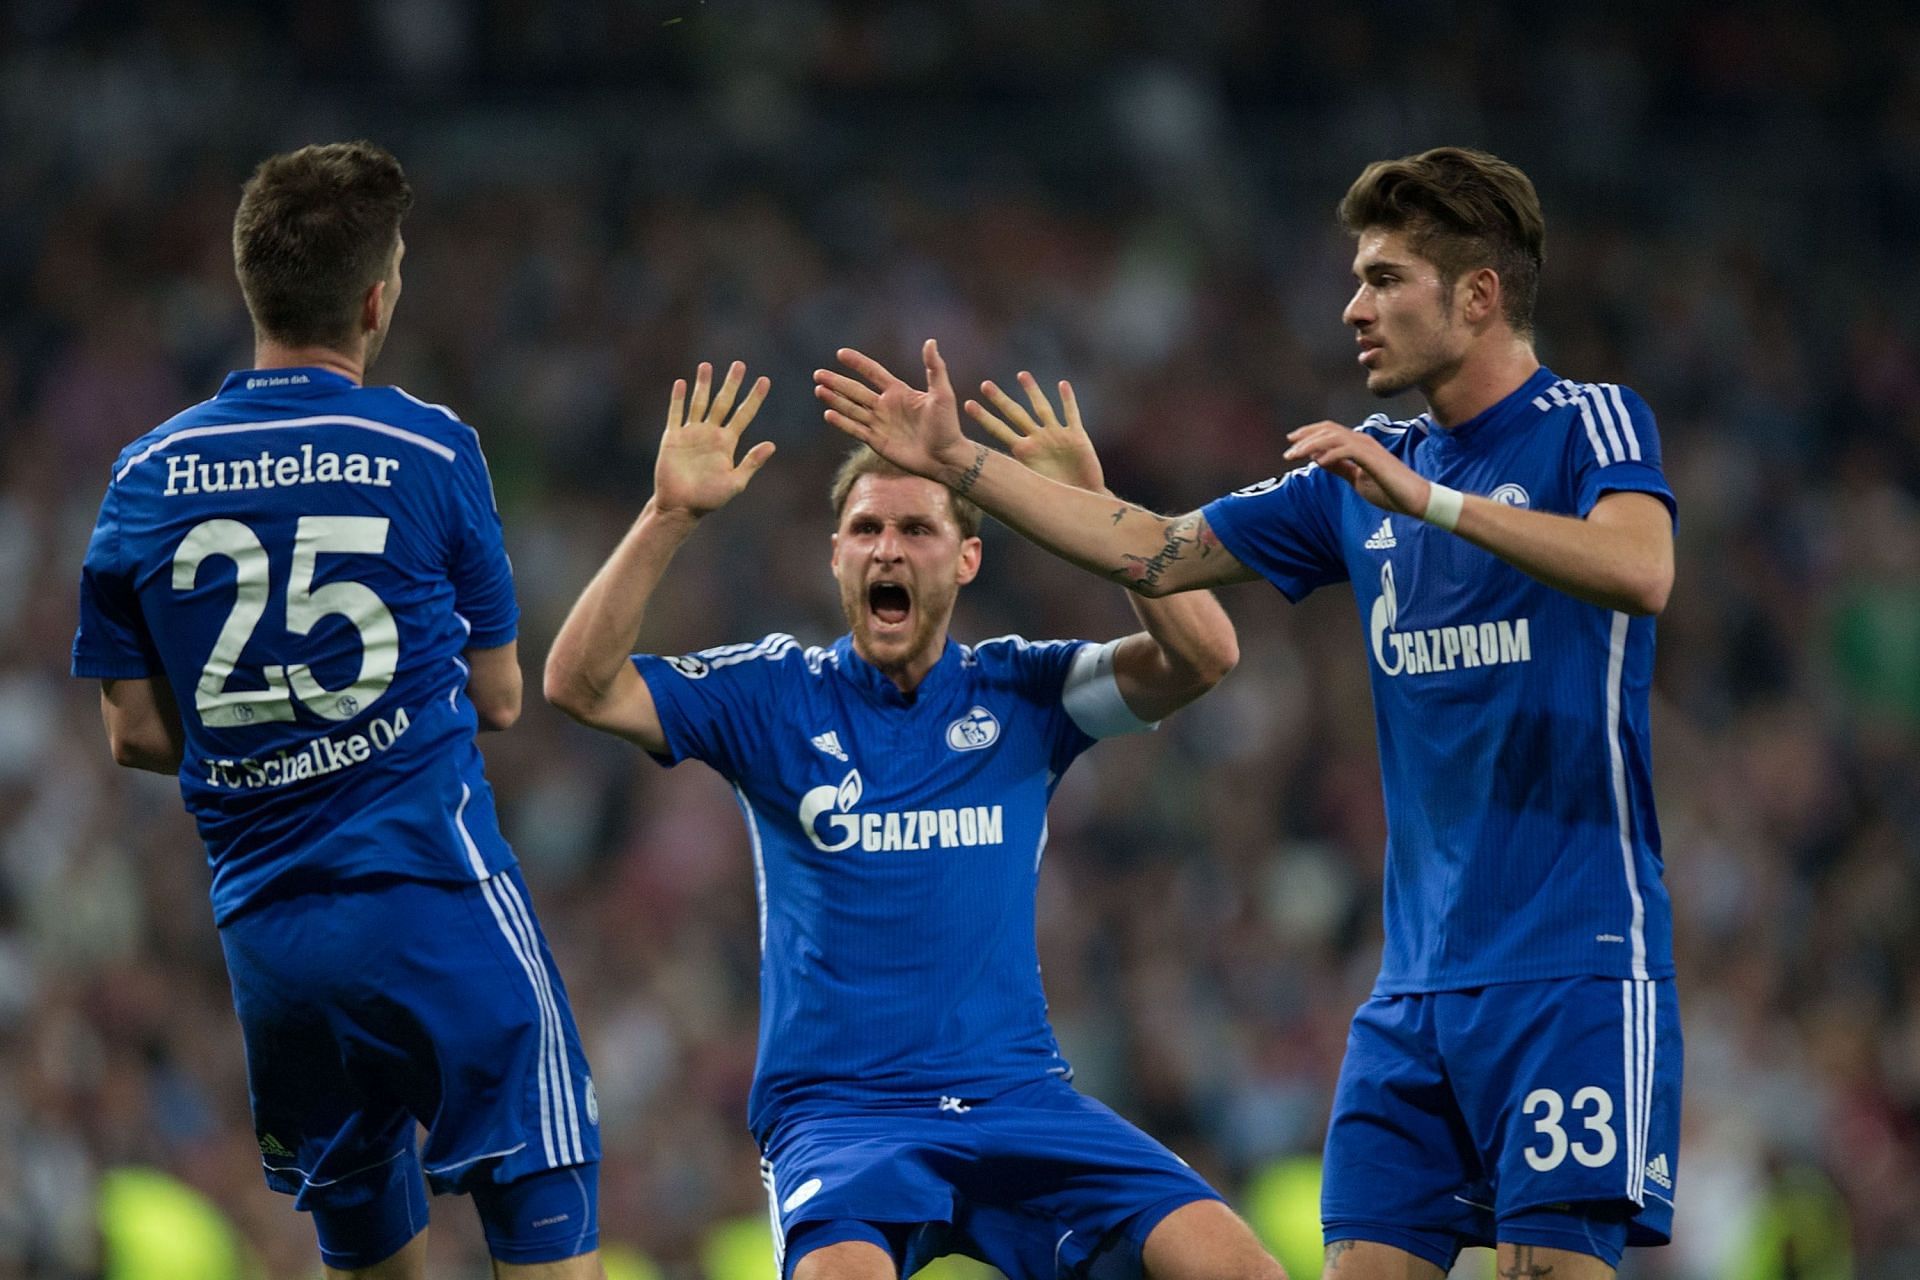 Schalke won a thrilling encounter by 4-3 with their spirited display but lost narrowly on aggregate